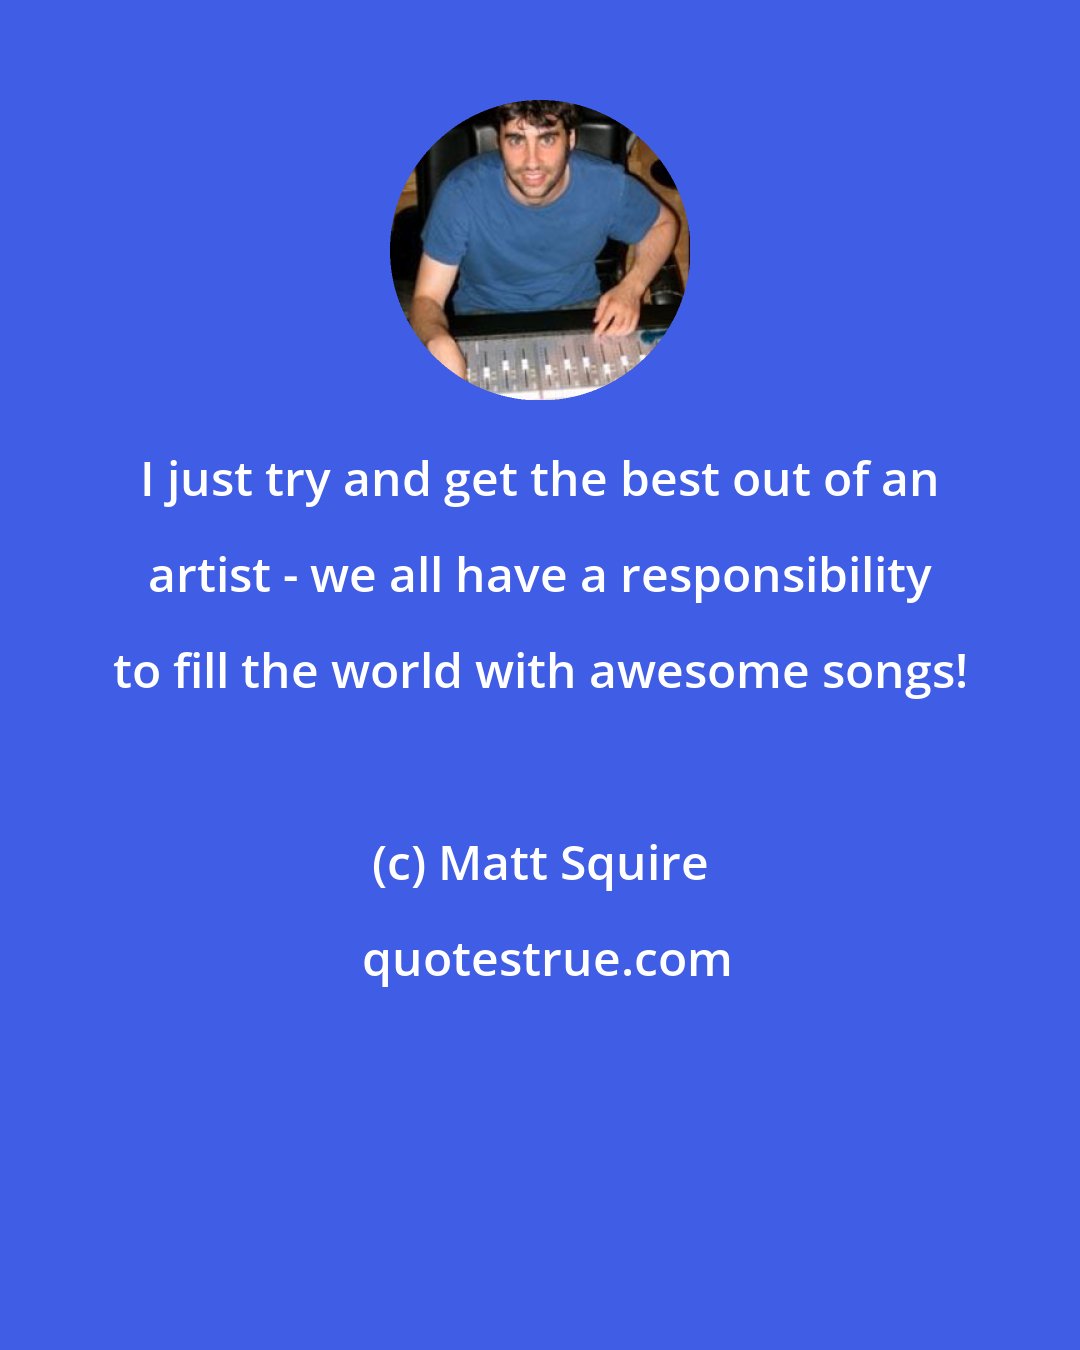 Matt Squire: I just try and get the best out of an artist - we all have a responsibility to fill the world with awesome songs!